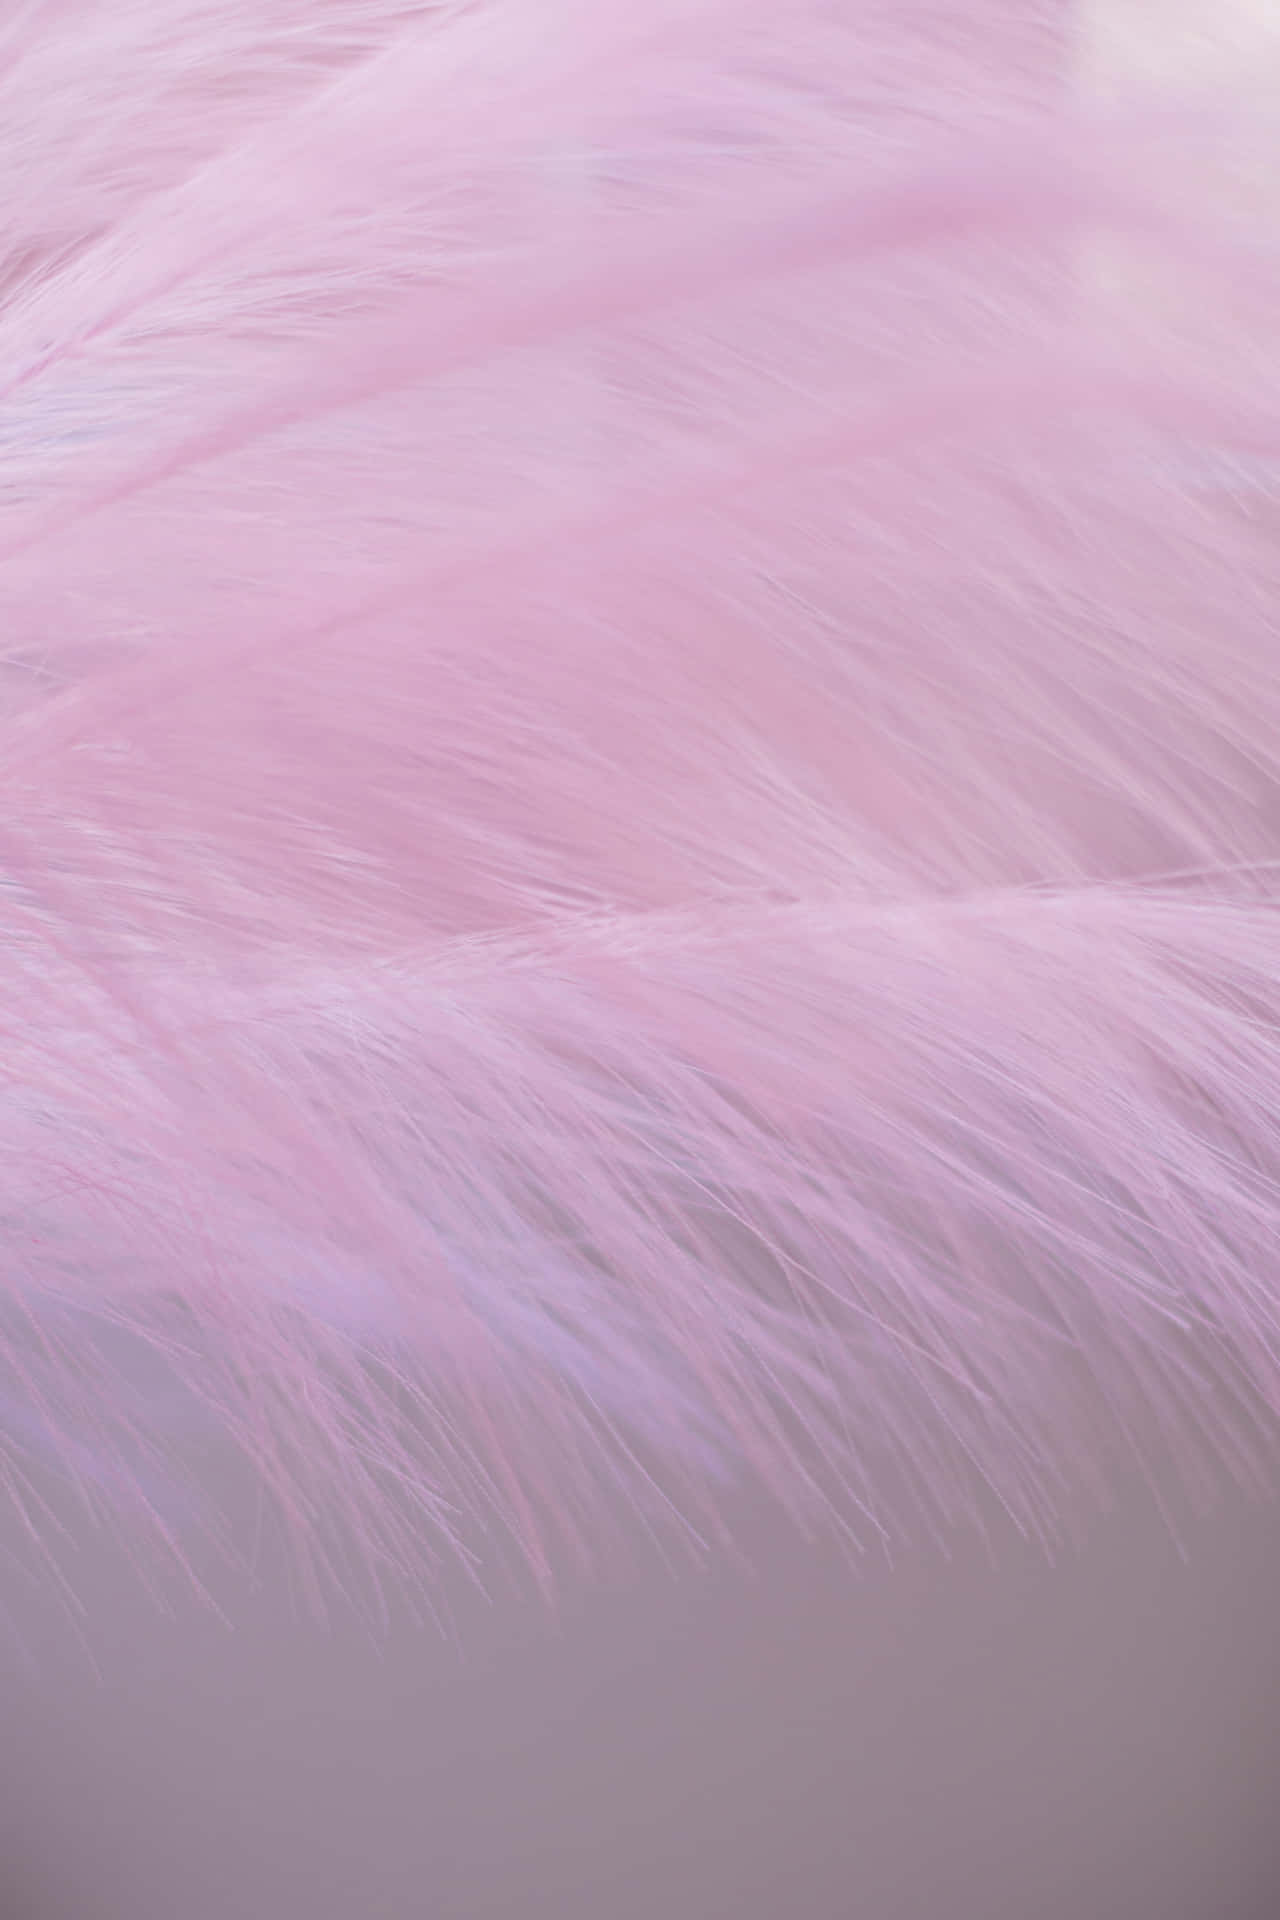 Create a dreamy, soft atmosphere with this Soft Pink background